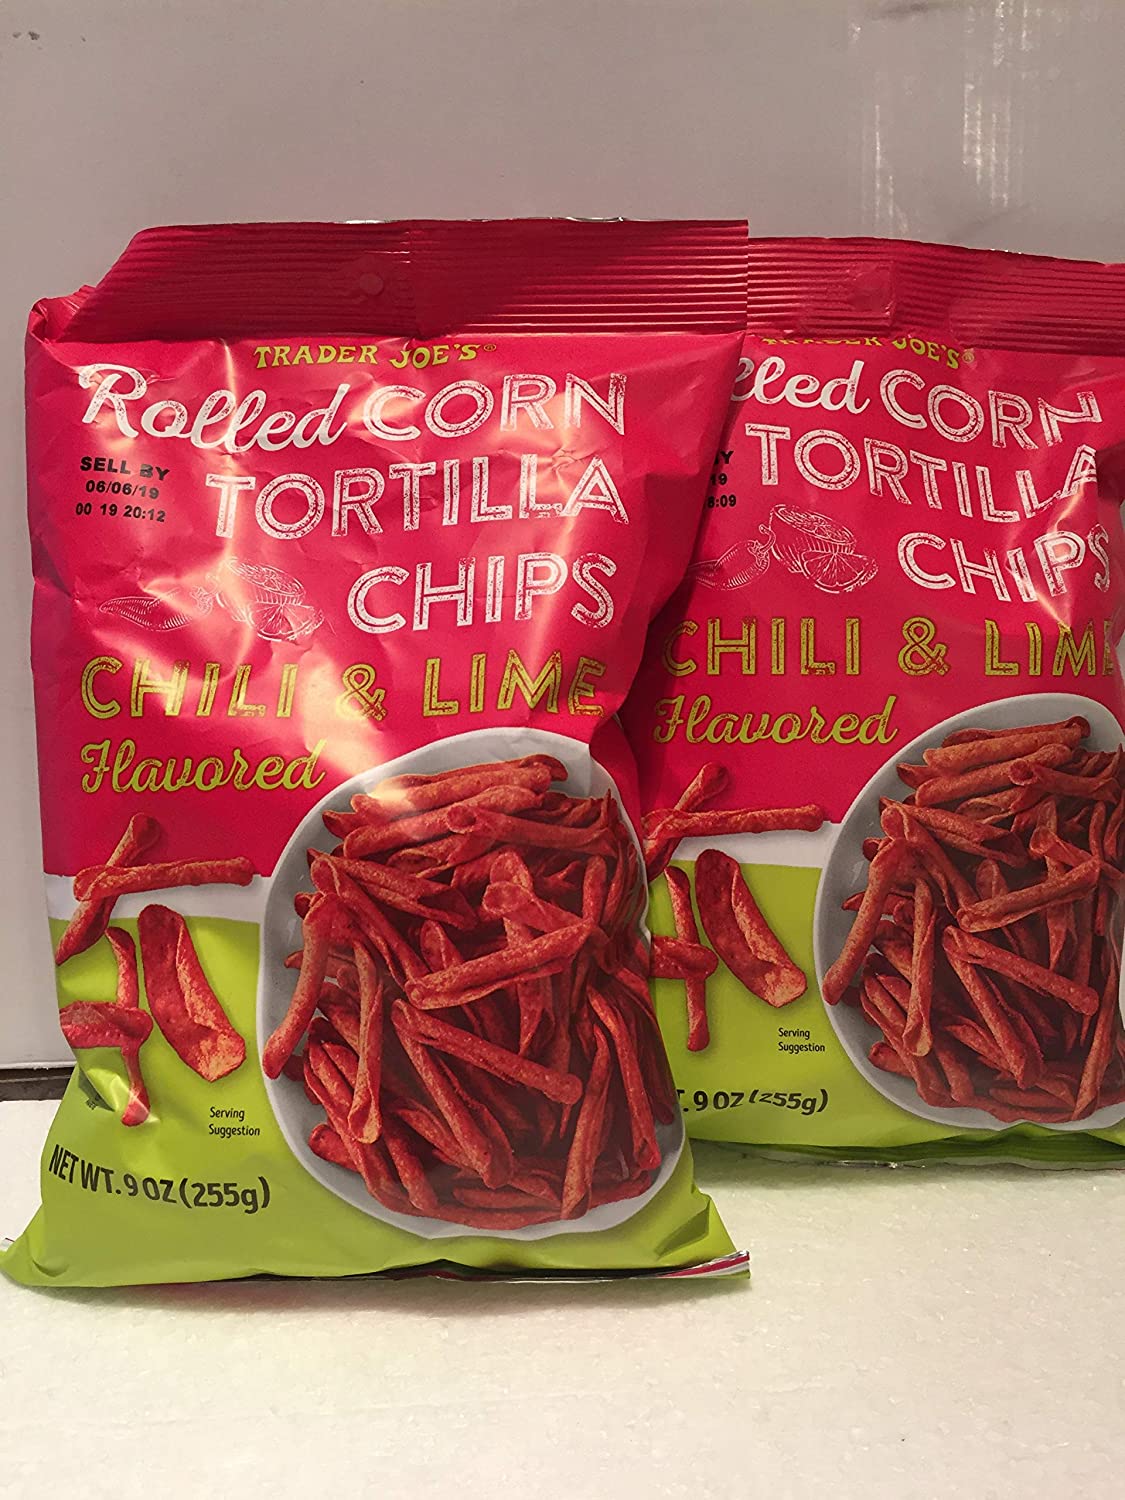 Trader Joes Rolled Corn Tortilla Chips - Chili & Lime Flavored - Gluten Free - NET WT (255g) - Pack of 2 Bags